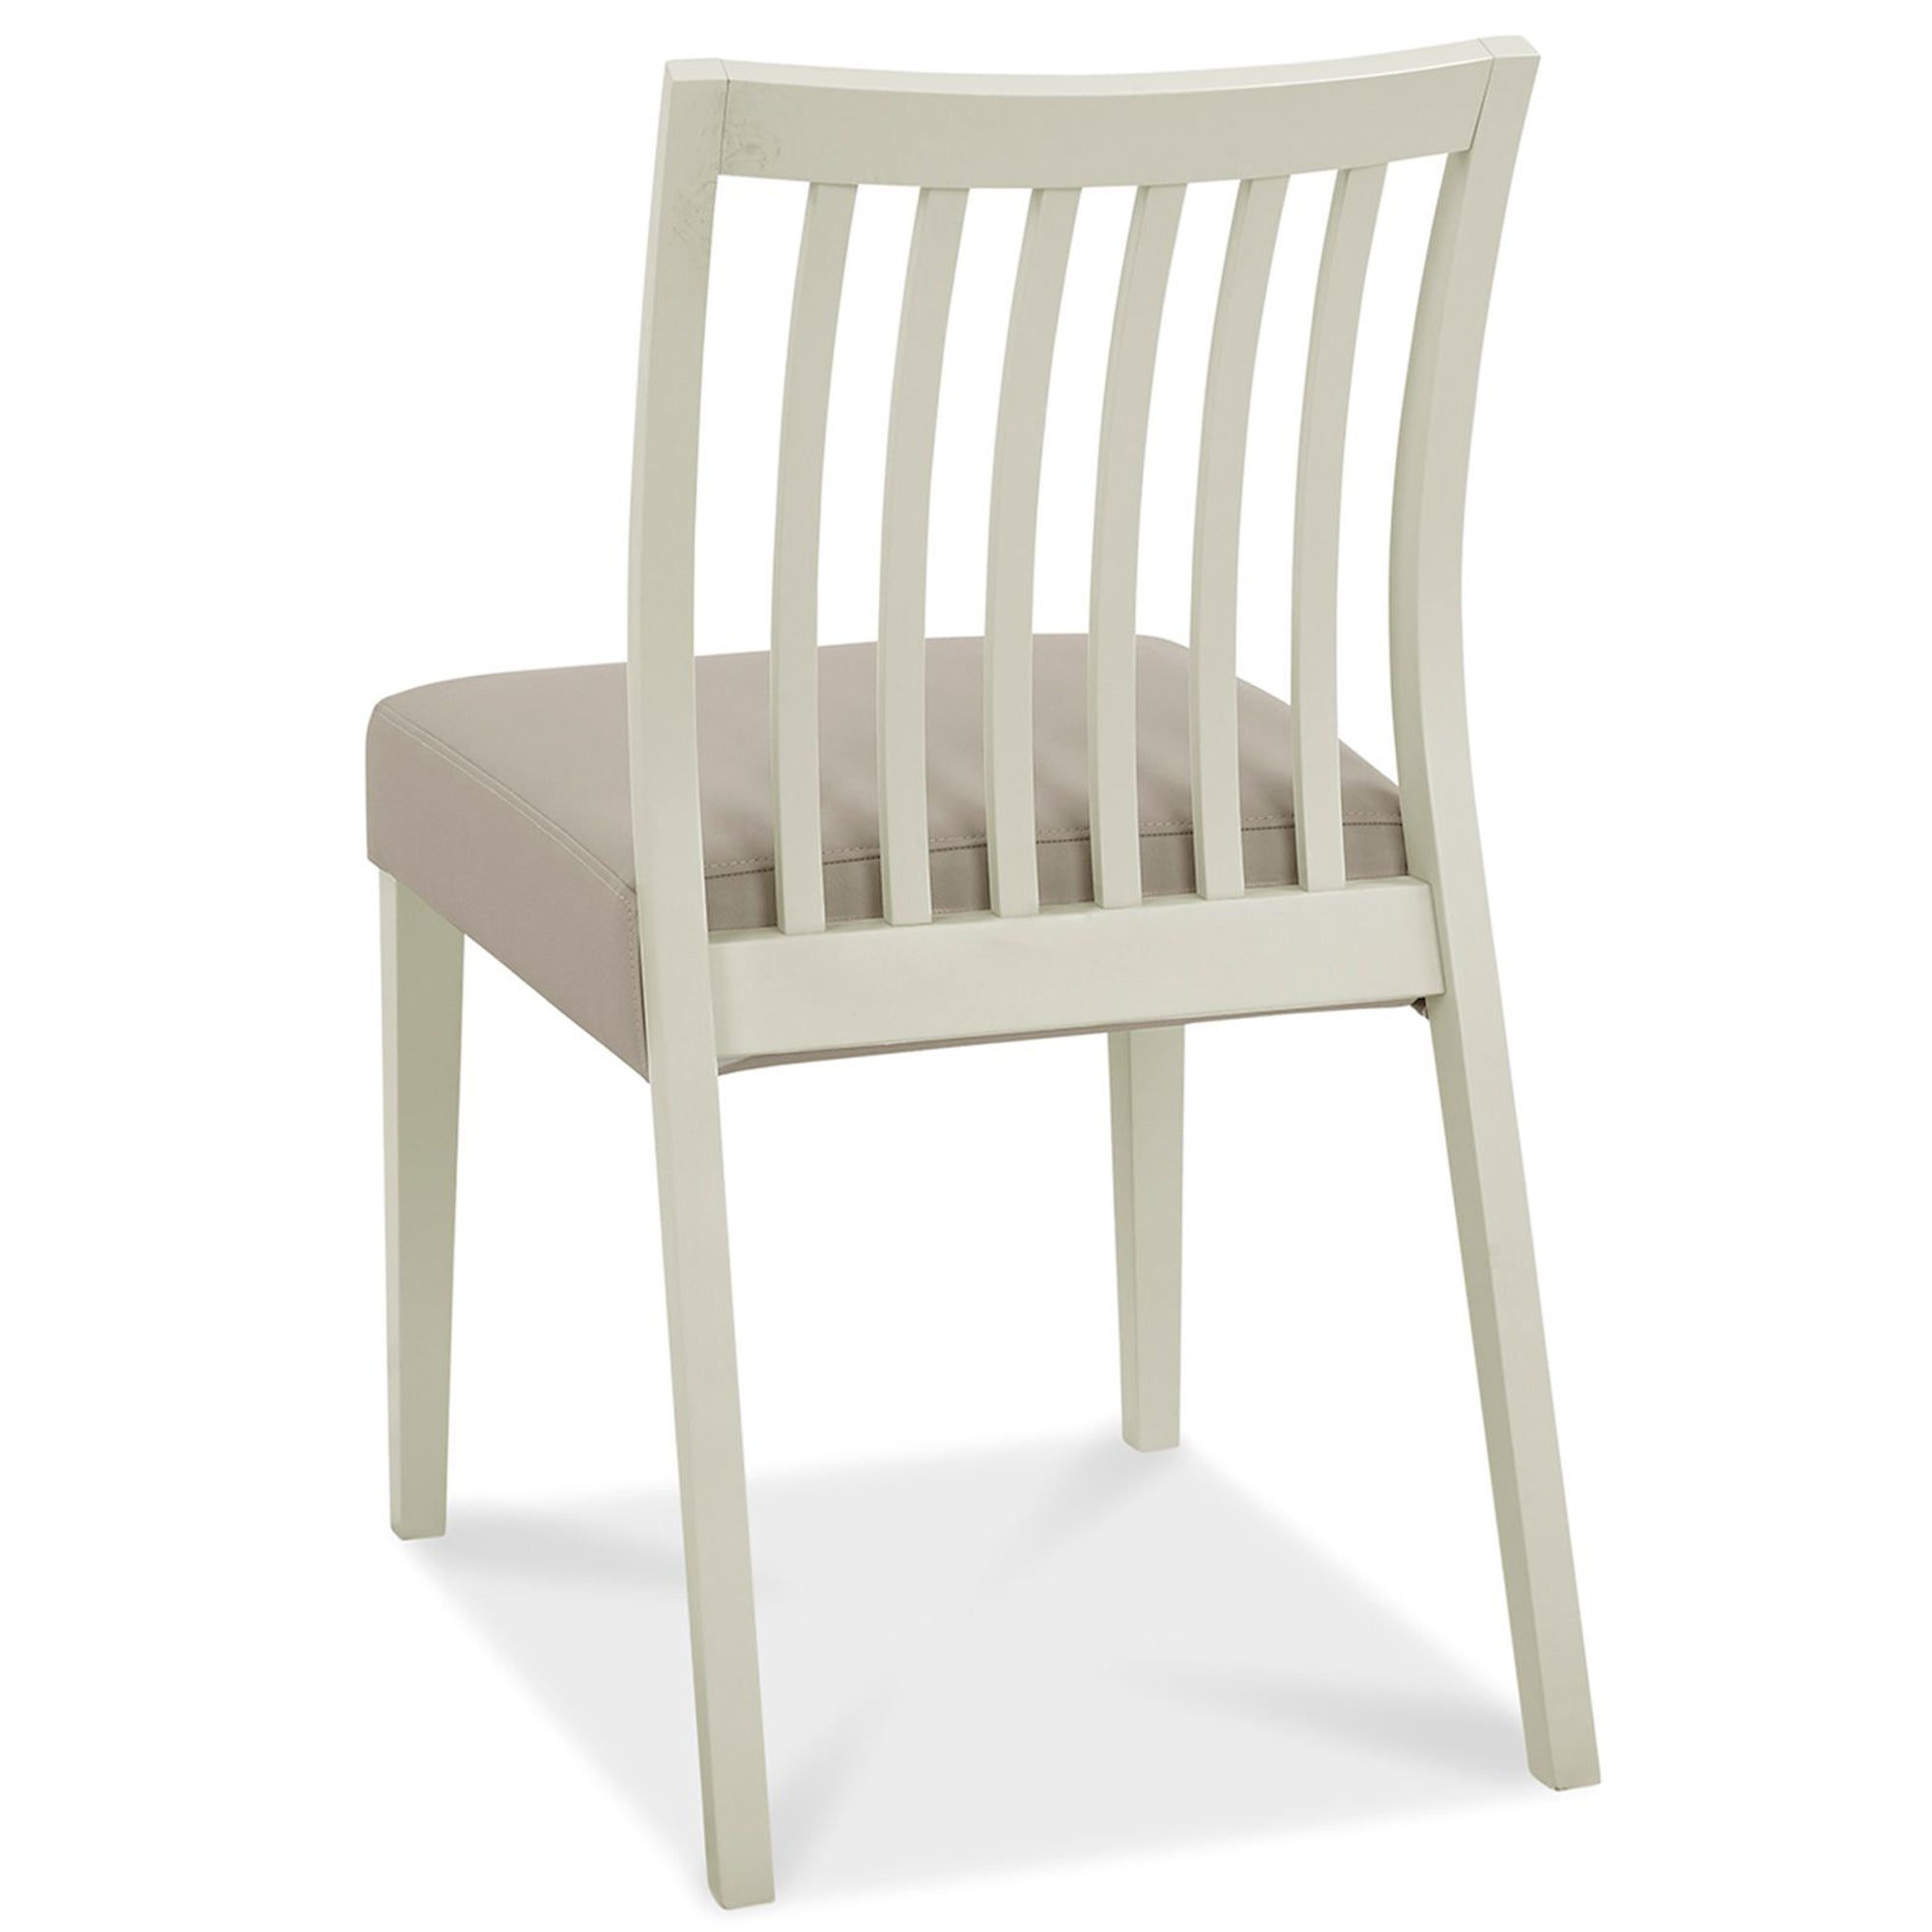 Boden Low Slatted Back Chair Grey (Pair)